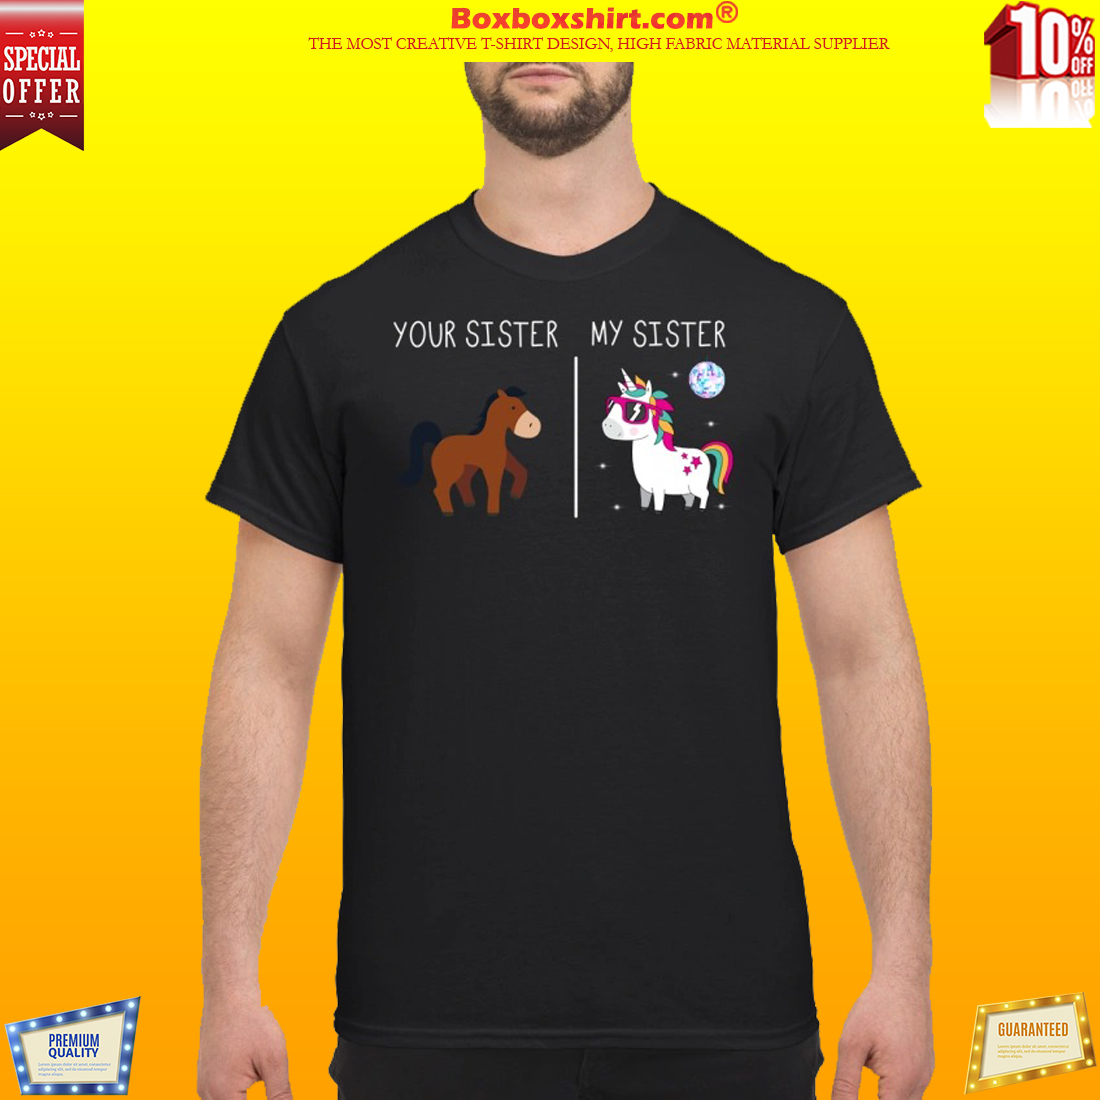 Your sister horse my sister unicorn classic shirt